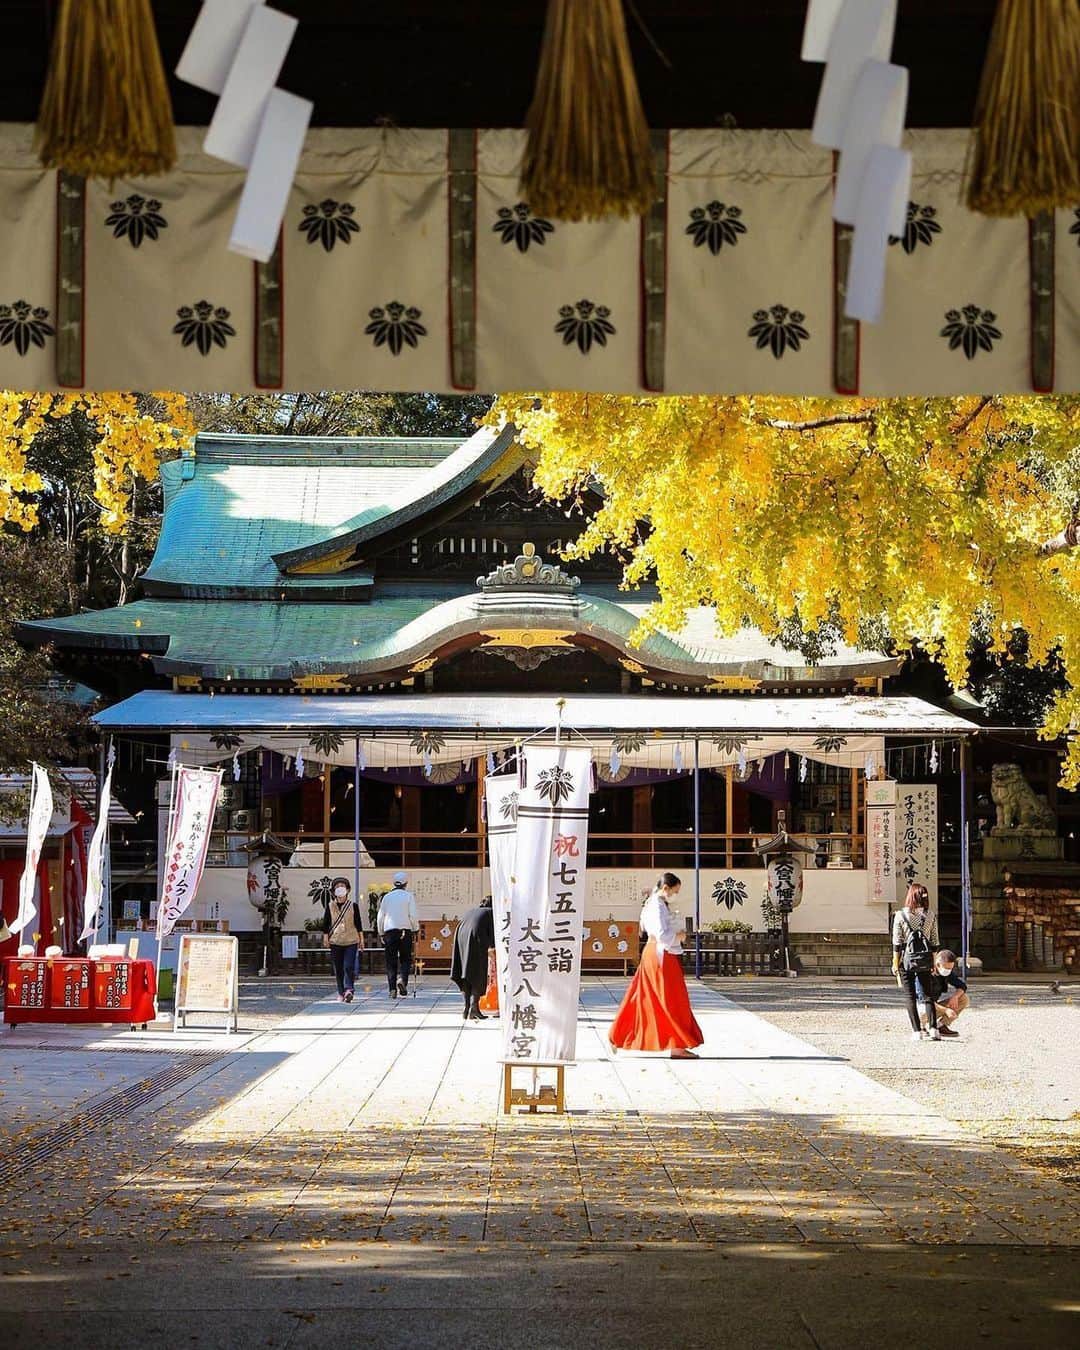 Promoting Tokyo Culture都庁文化振興部さんのインスタグラム写真 - (Promoting Tokyo Culture都庁文化振興部Instagram)「Omiya Hachimangu Shrine is a well-known shrine that brings good luck for marriage, childbirth, and child-rearing.  Many people visit the shrine every year for Shichi-Go-San, a traditional Japanese celebration for 3 and 7-year-old girls, and 5 and sometimes 3-year-old boys. Typically held in mid-November, this festival is a joyful occasion, marked by the sight of golden gingko trees gracing the shrine's surroundings.  子供の健やかな成長を3歳・5・7歳を節目に祝い祈願する11月の伝統行事「七五三」。 杉並区の「大宮八幡宮」は縁結び・安産・子育てにご利益のある神社として親しまれており、毎年多くの方々が七五三のお参りに足を運びます。 黄色く色づいた銀杏の木が境内を彩る光景もまた、この時期ならではです。  #tokyoartsandculture 📸: @ariel.land  #suginamiku #Ginkgo #杉並区 #大宮八幡宮 #銀杏 #紅葉 #japantraditional #japanculture  #artandculture #artculture #culturalexperience #artexperience #culturetrip #theculturetrip #japantrip #tokyotrip #tokyophotography #tokyojapan  #tokyotokyo #explorejpn #unknownjapan #discoverjapan #japan_of_insta  #nipponpic  #japanfocus #japanesestyle #artphoto #artstagram」11月20日 23時20分 - tokyoartsandculture